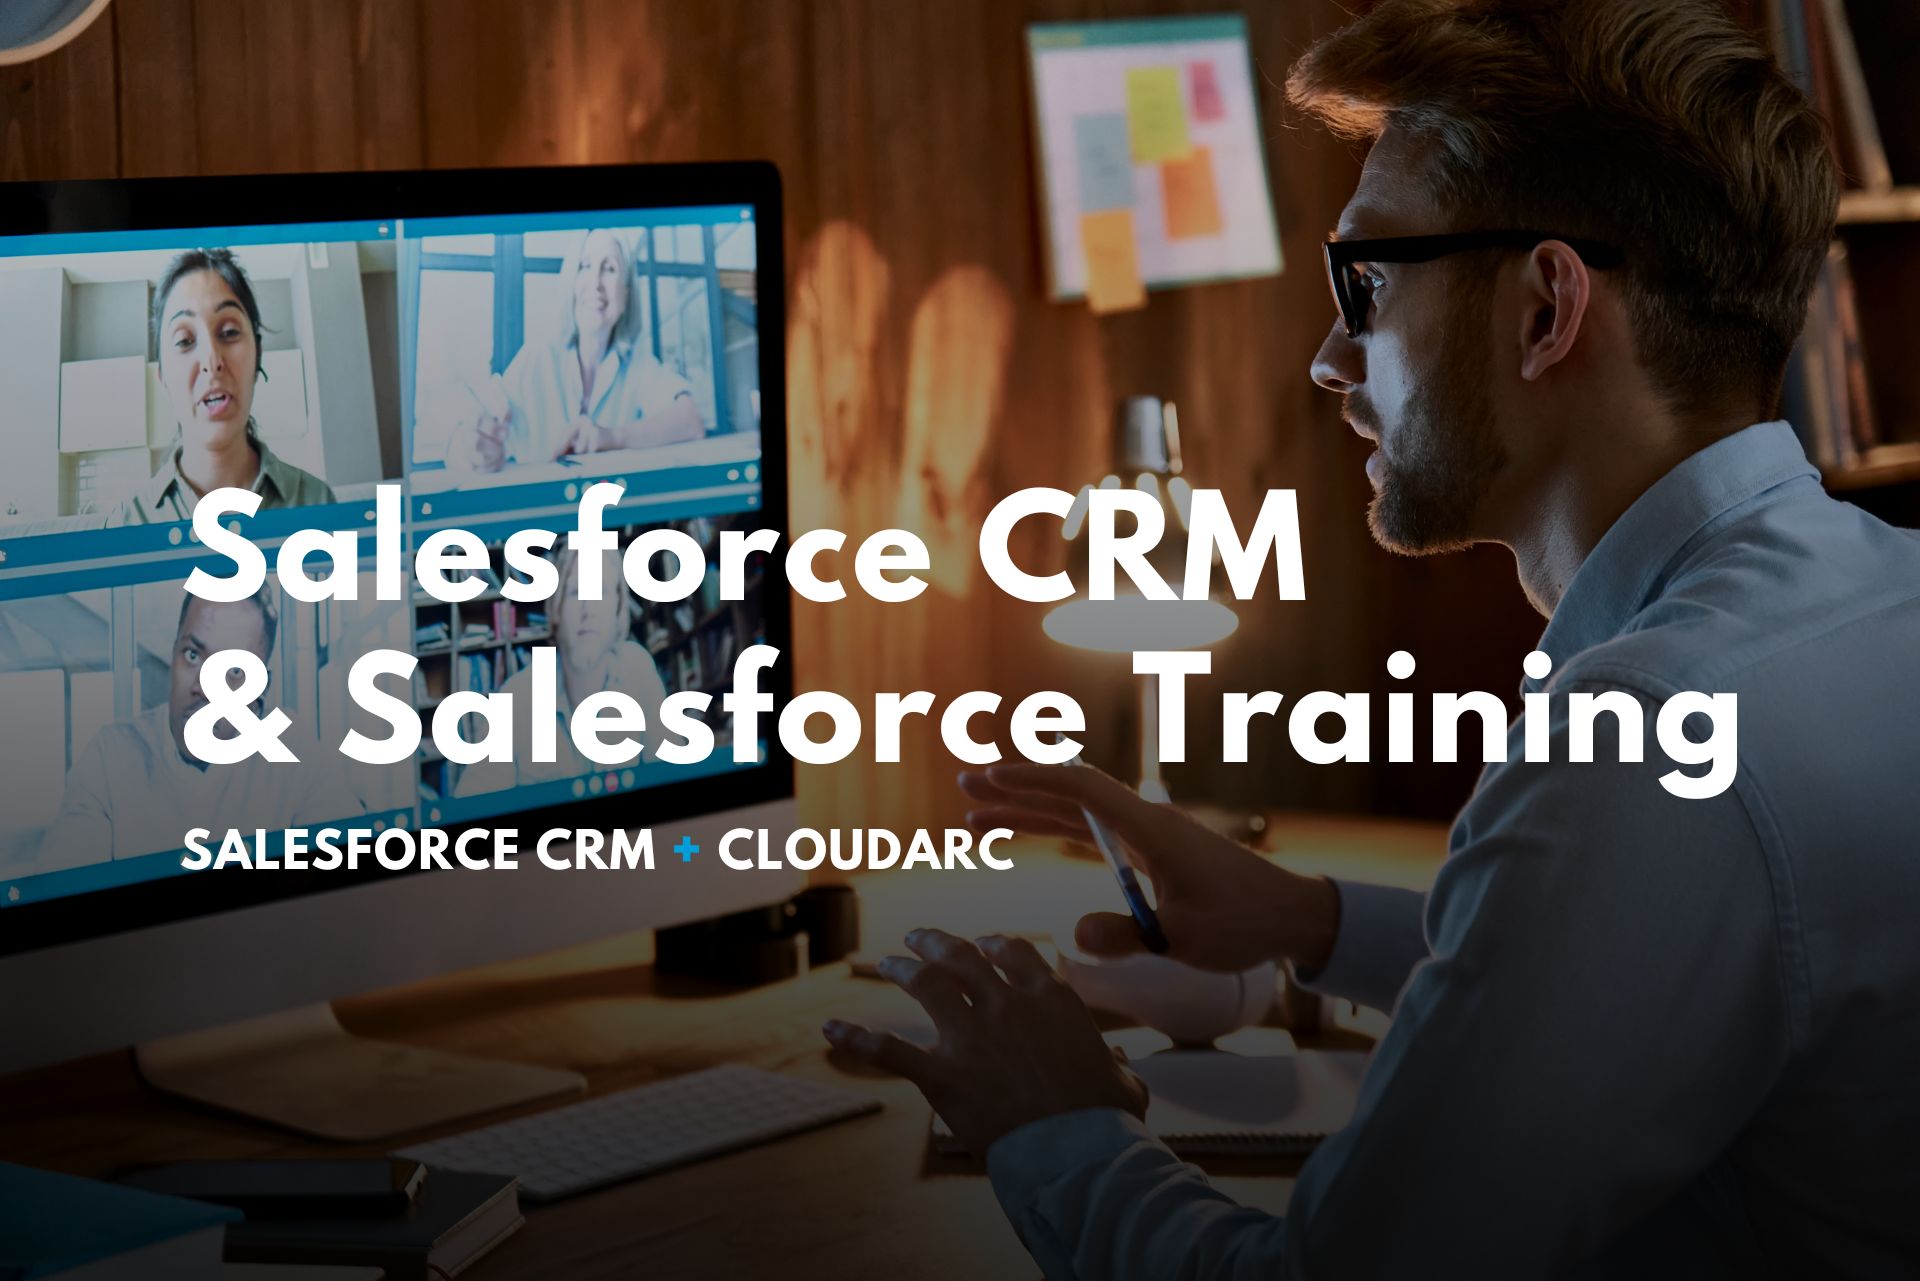 cloudarc-new-hands-on-support-for-salesforce-crm-salesforce-training